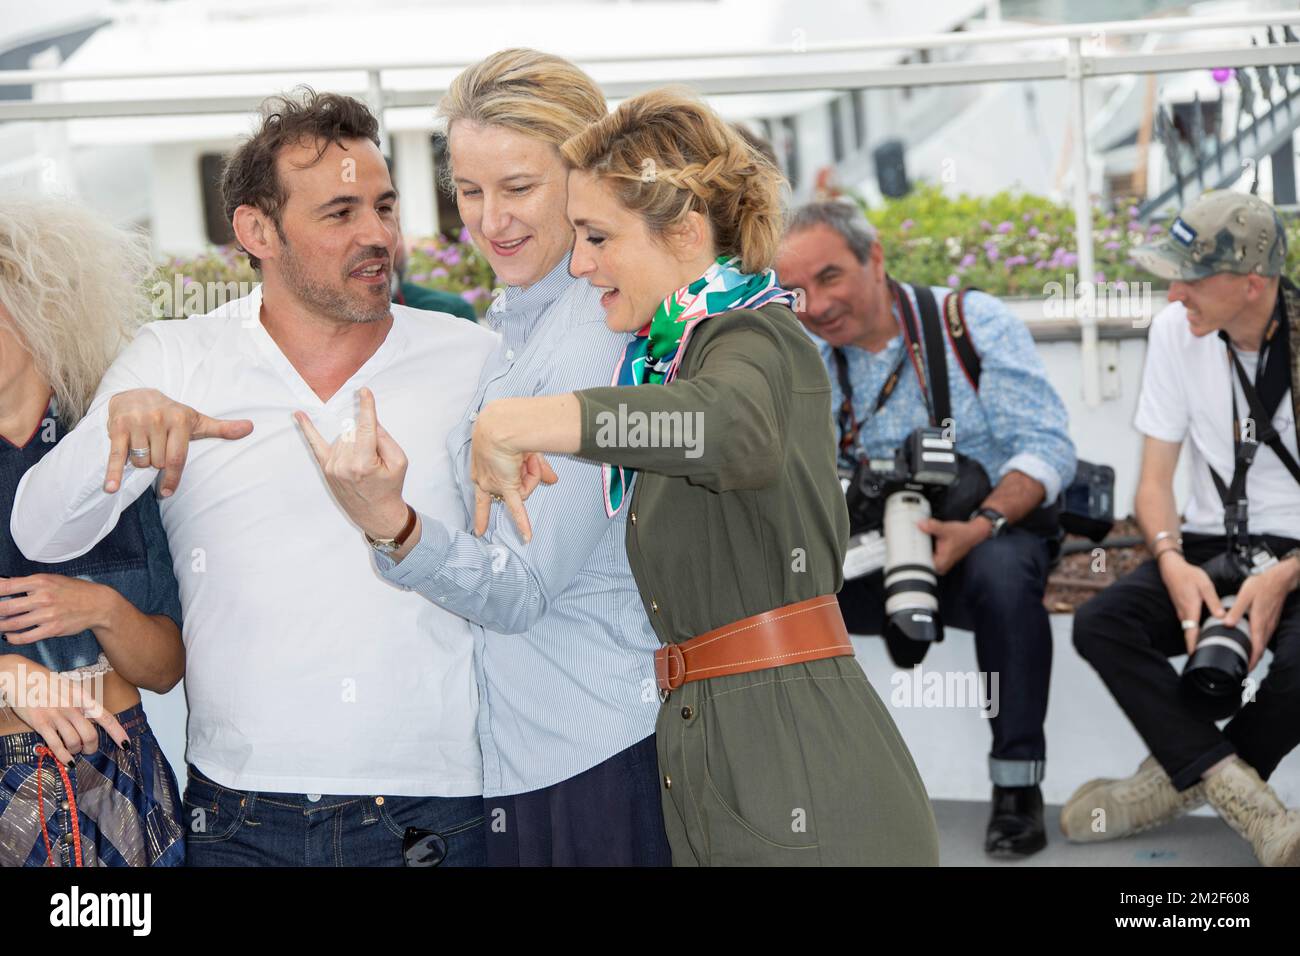 Actor Stephane Rideau, Russian producer Nadia Turincev and French actress and producer Julie Gayet the photocall for the 'Murder Me, Monster (Meurs, Monstre, Meurs)' during the 71st annual Cannes Film Festival at Palais des Festivals | L'acteur Stephane Rideau, la productrice Nadia Turincev Julie Gayet au photocall de 'Murder Me, Monstre, Monster (Meurs, Monstre, Meurs)' lors du 71ème Festival de Cannes au Palais des Festivals. 13/05/2018 Stock Photo